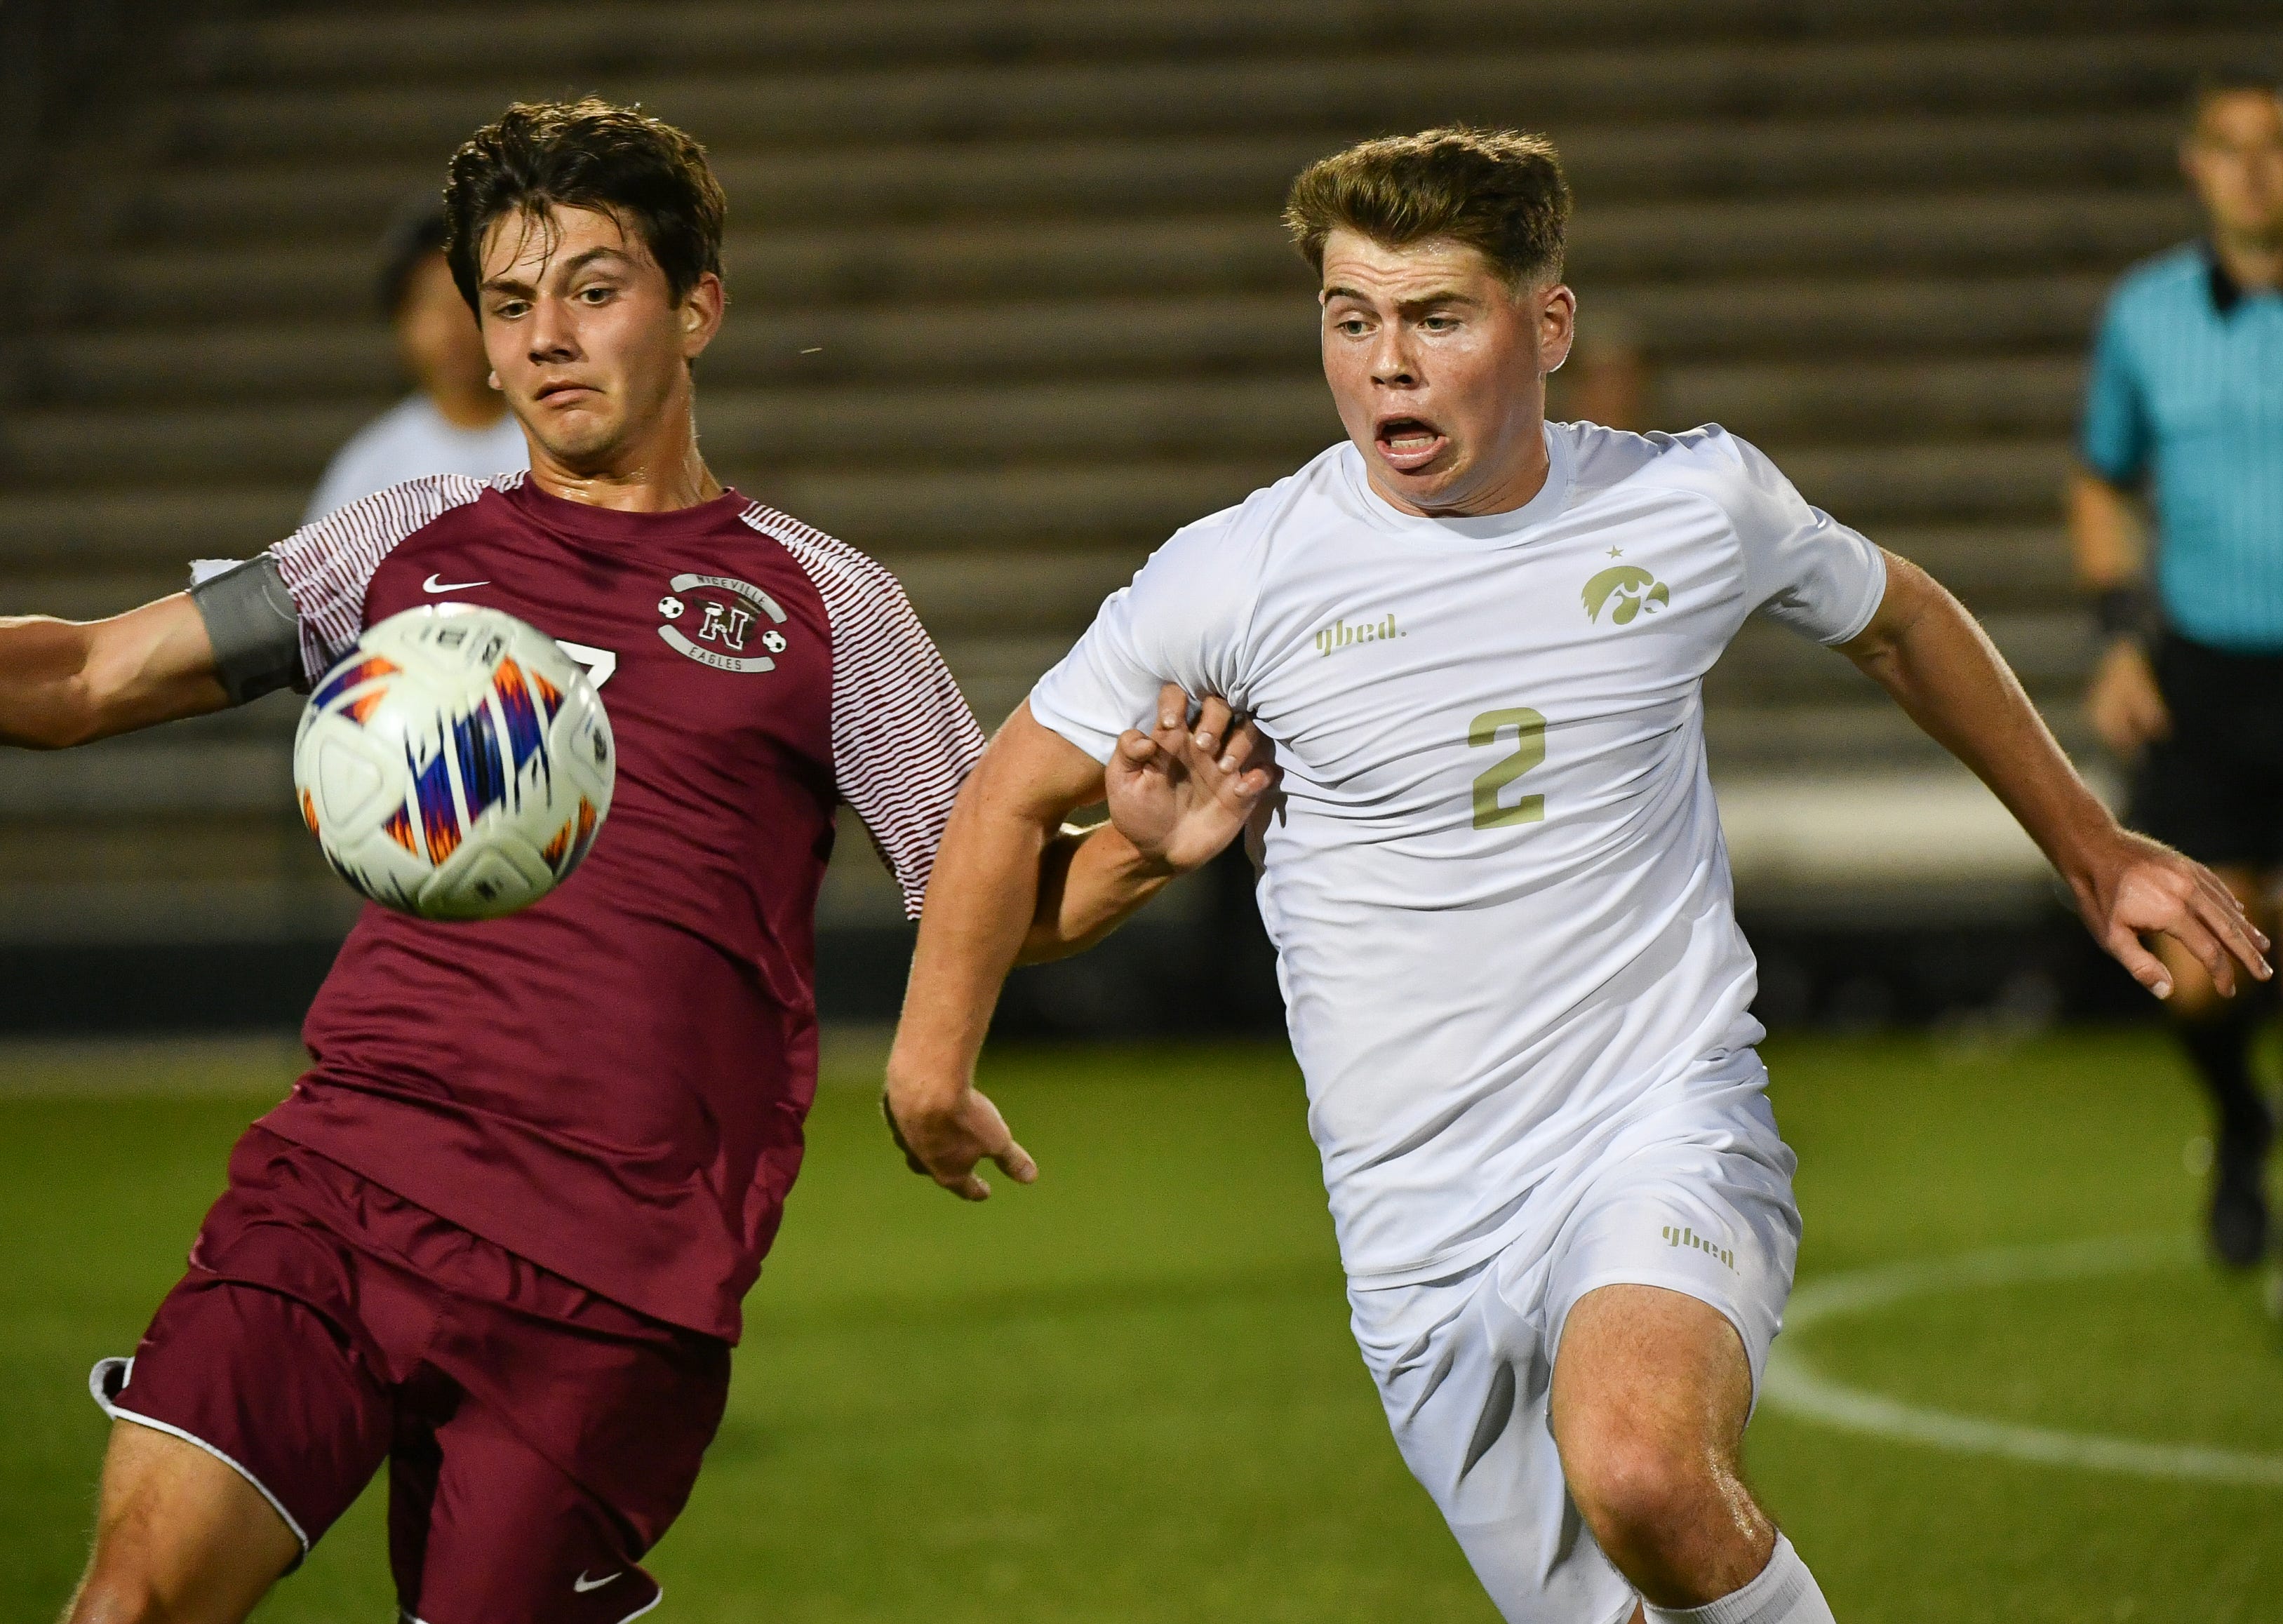 Viera’s Unwavering Pursuit of Back-to-Back State Titles in Soccer